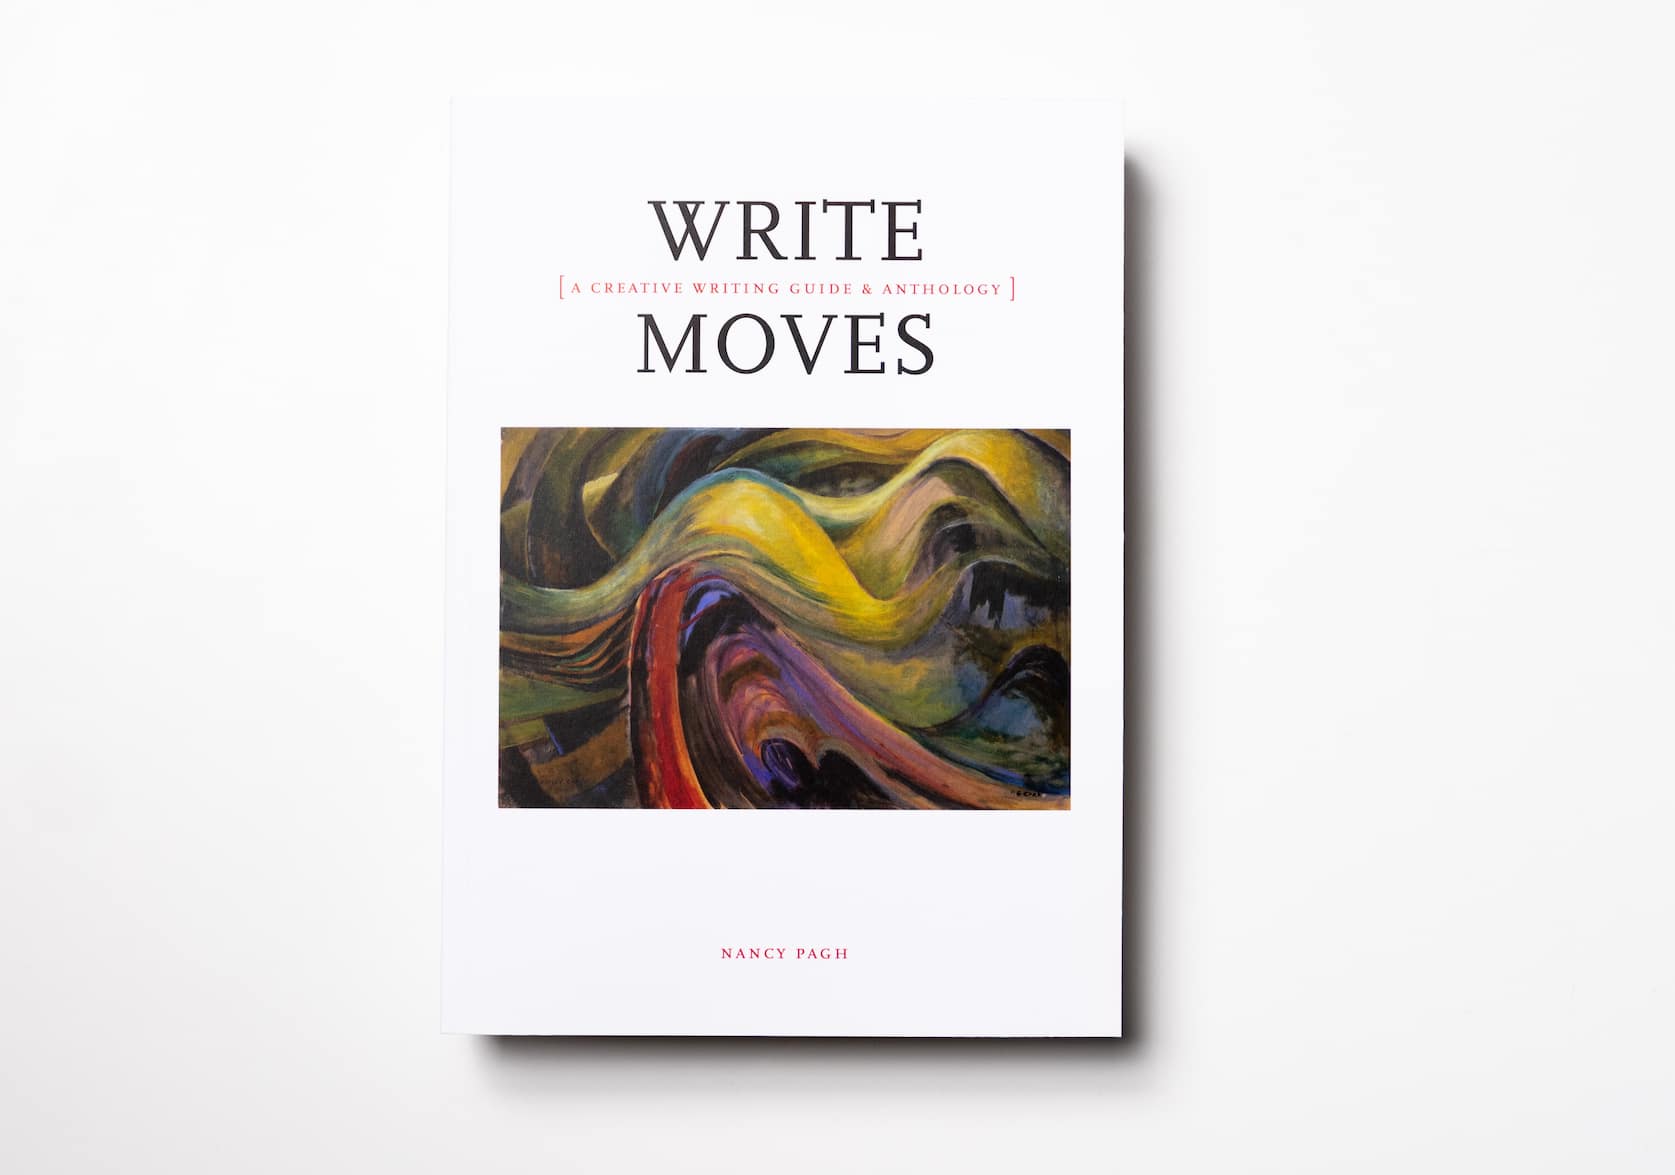 Write Moves: A Creative Writing Guide & Anthology by Nancy Pagh